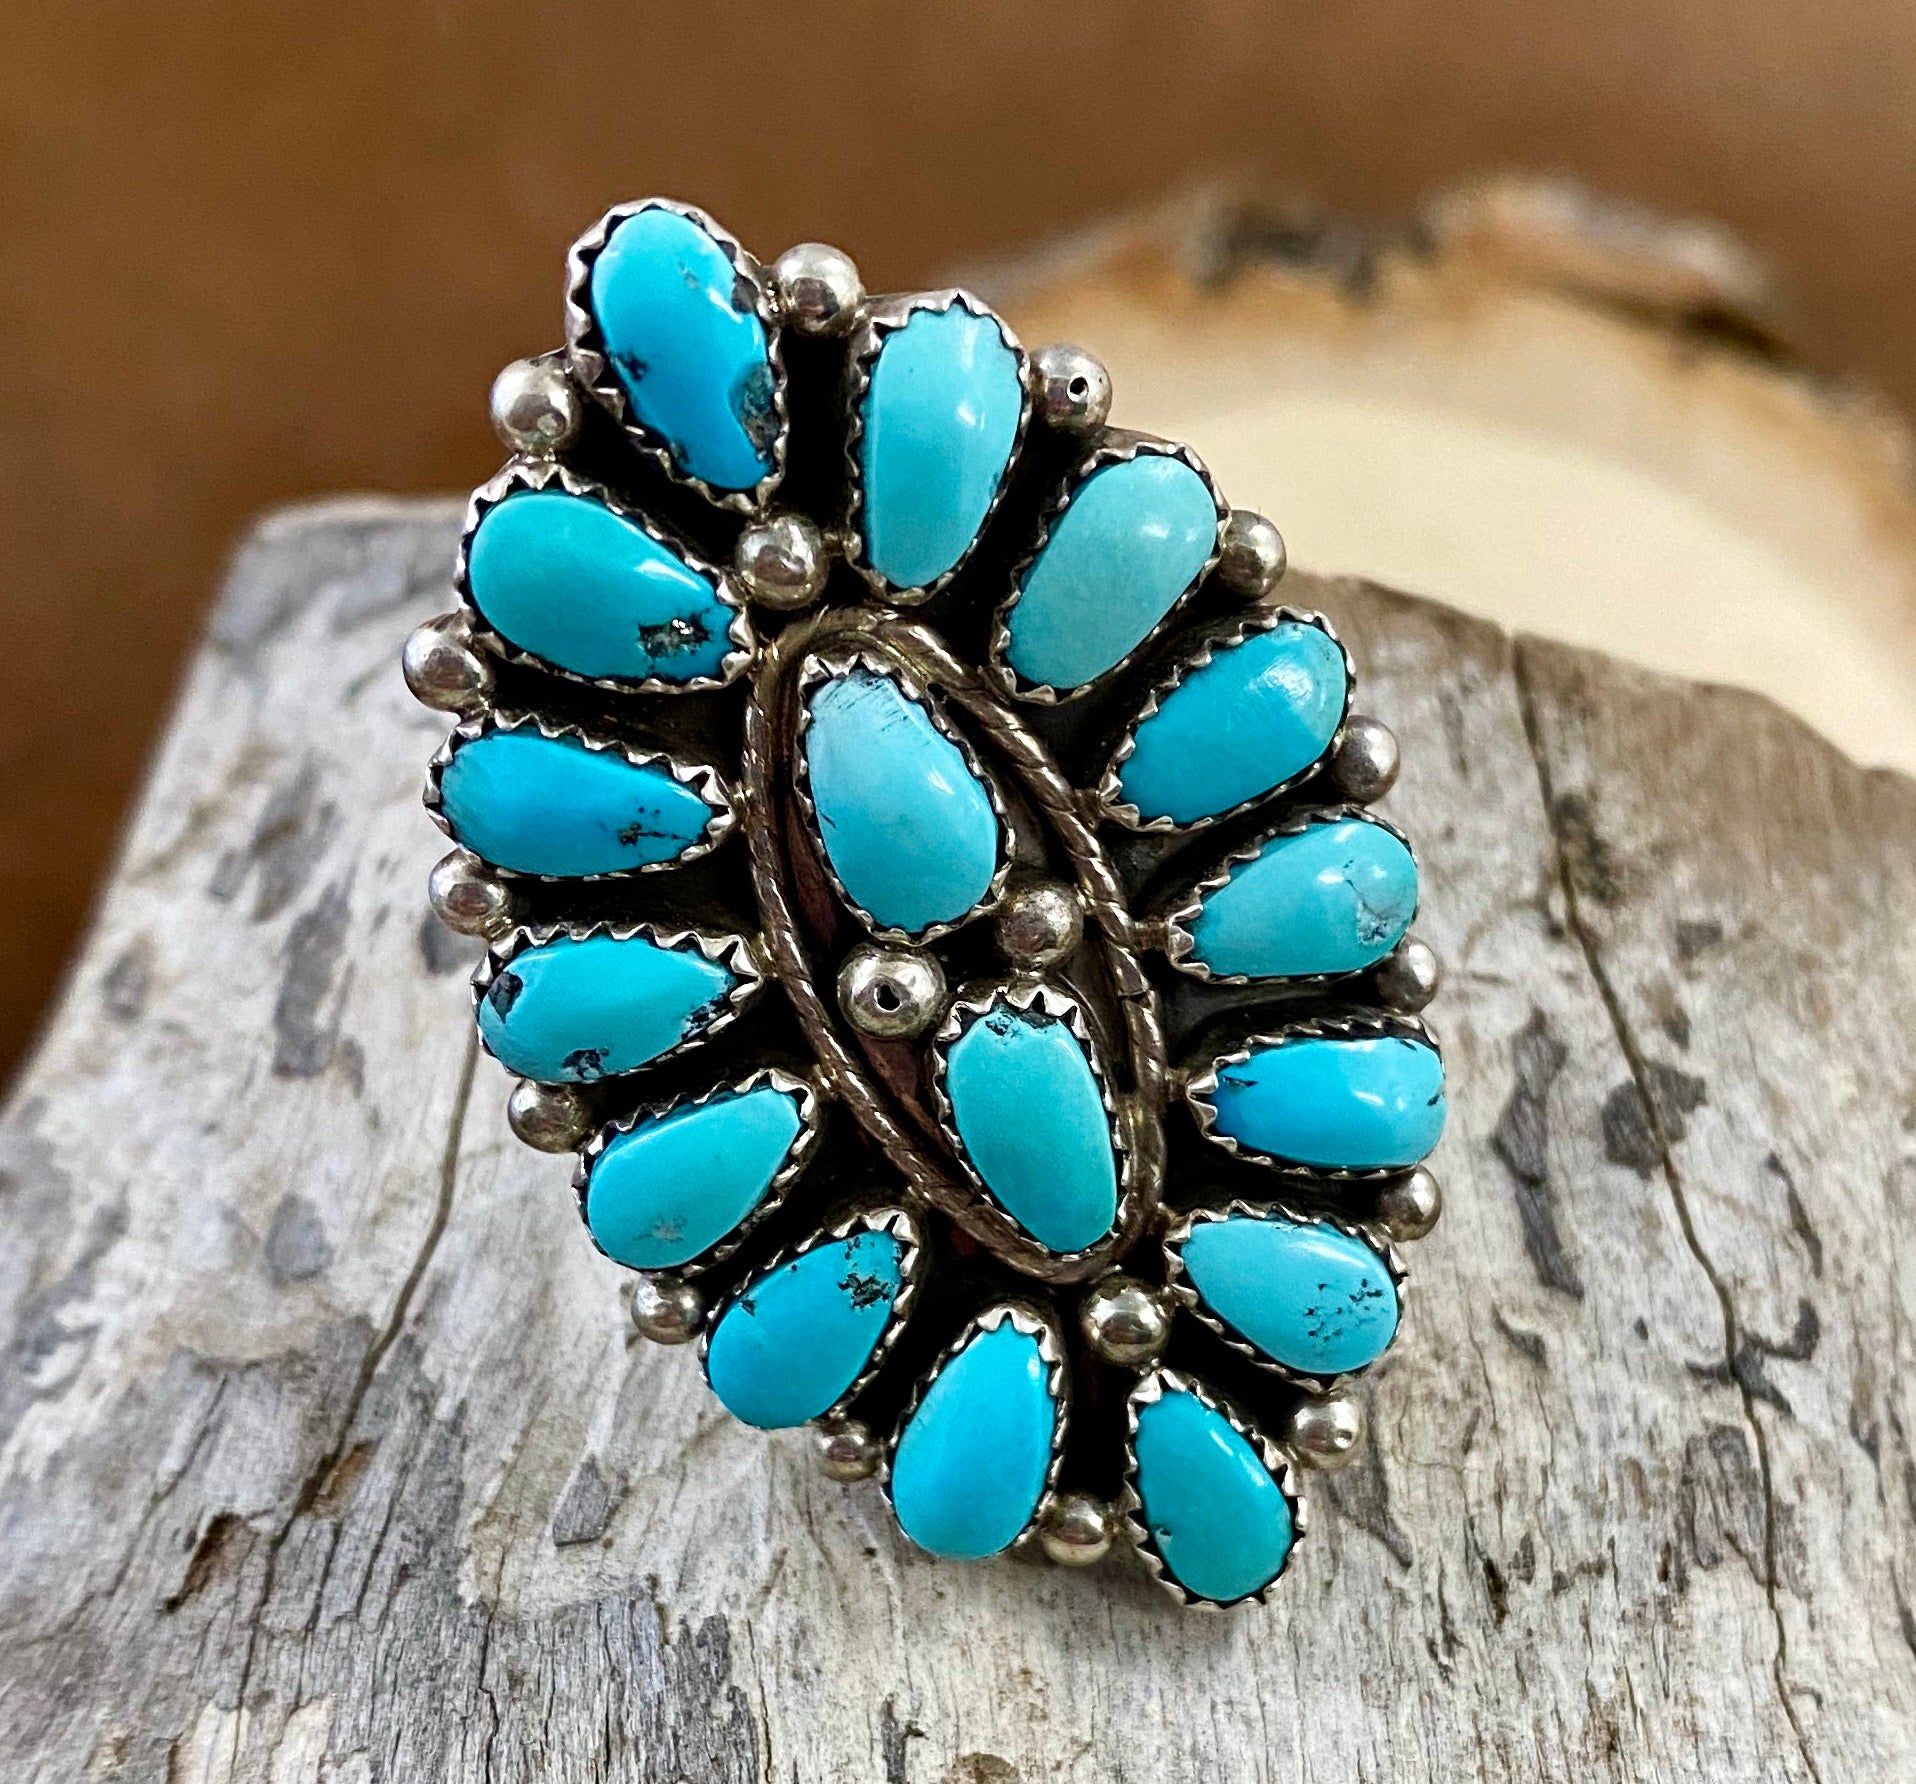 Authentic handmade turquoise sterling silver unique cluster ring. Stamped sterling and signed EJW by artist silversmith on back. This size 9 ring is stunning and unique, the color variation throughout this piece is especially beautiful. Native American Turquoise Ring, Western Turquoise Rings, Western Jewelry, NFR Style